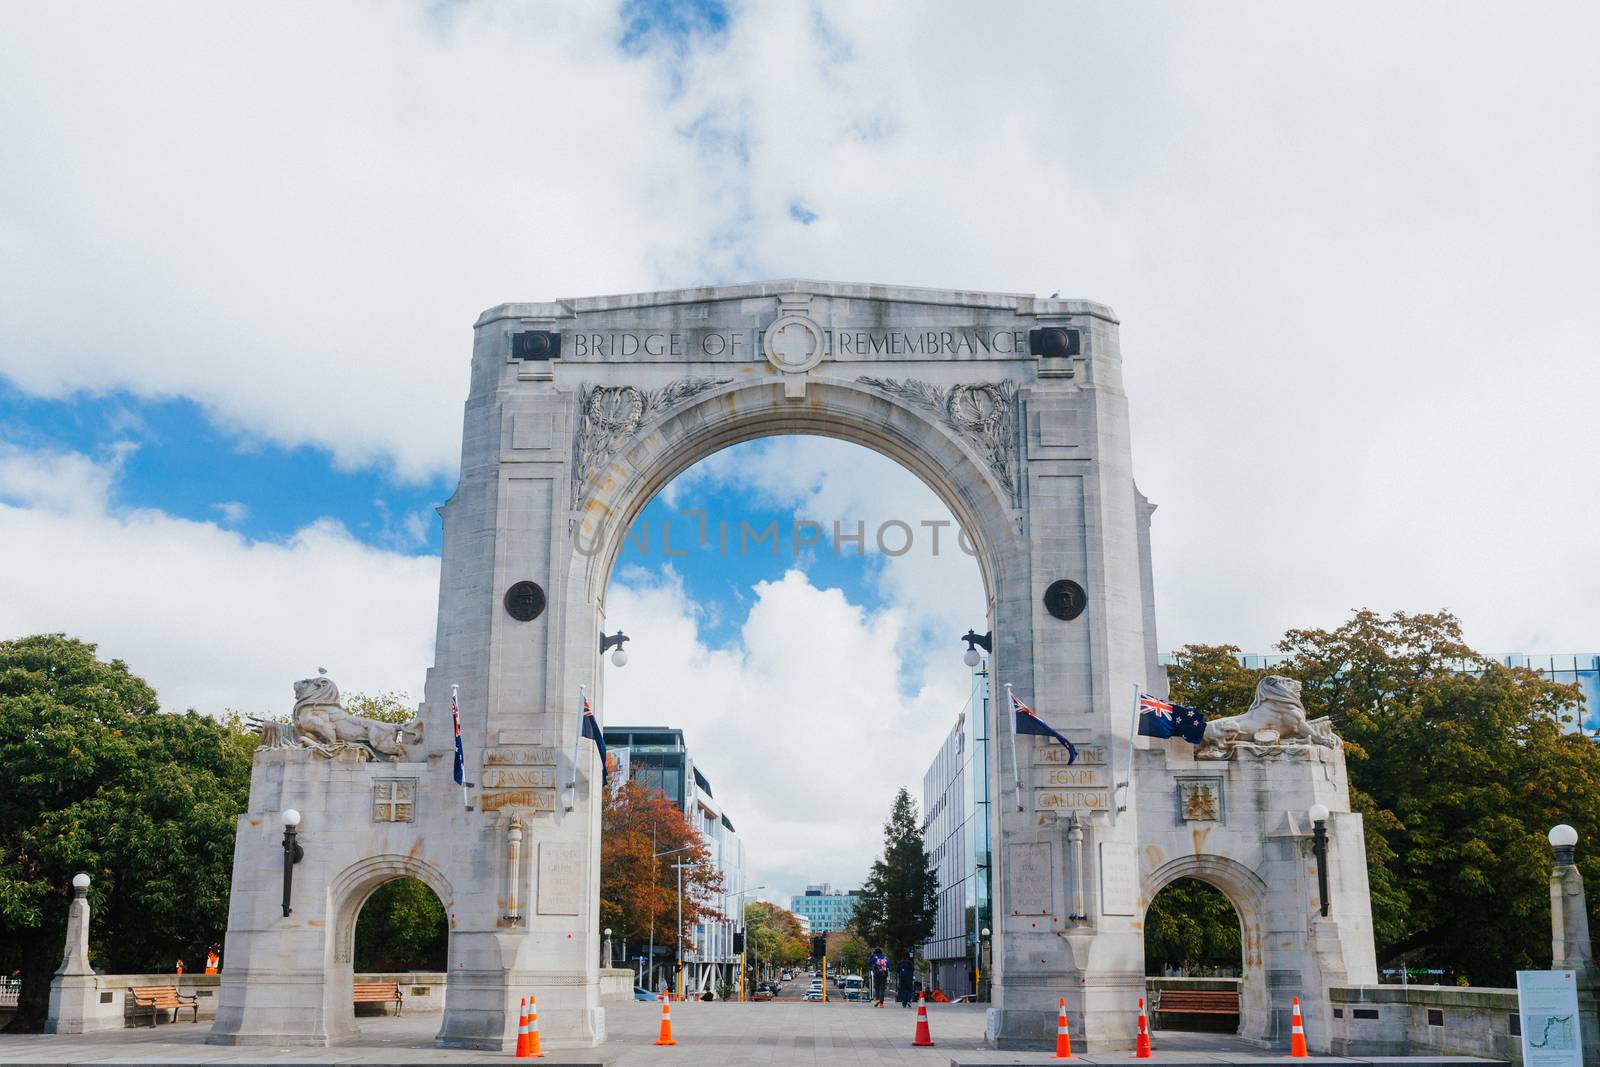 Bridge of Remembrance in the cloudy day. The landmark located in the city centre of Christchurch, New Zealand.